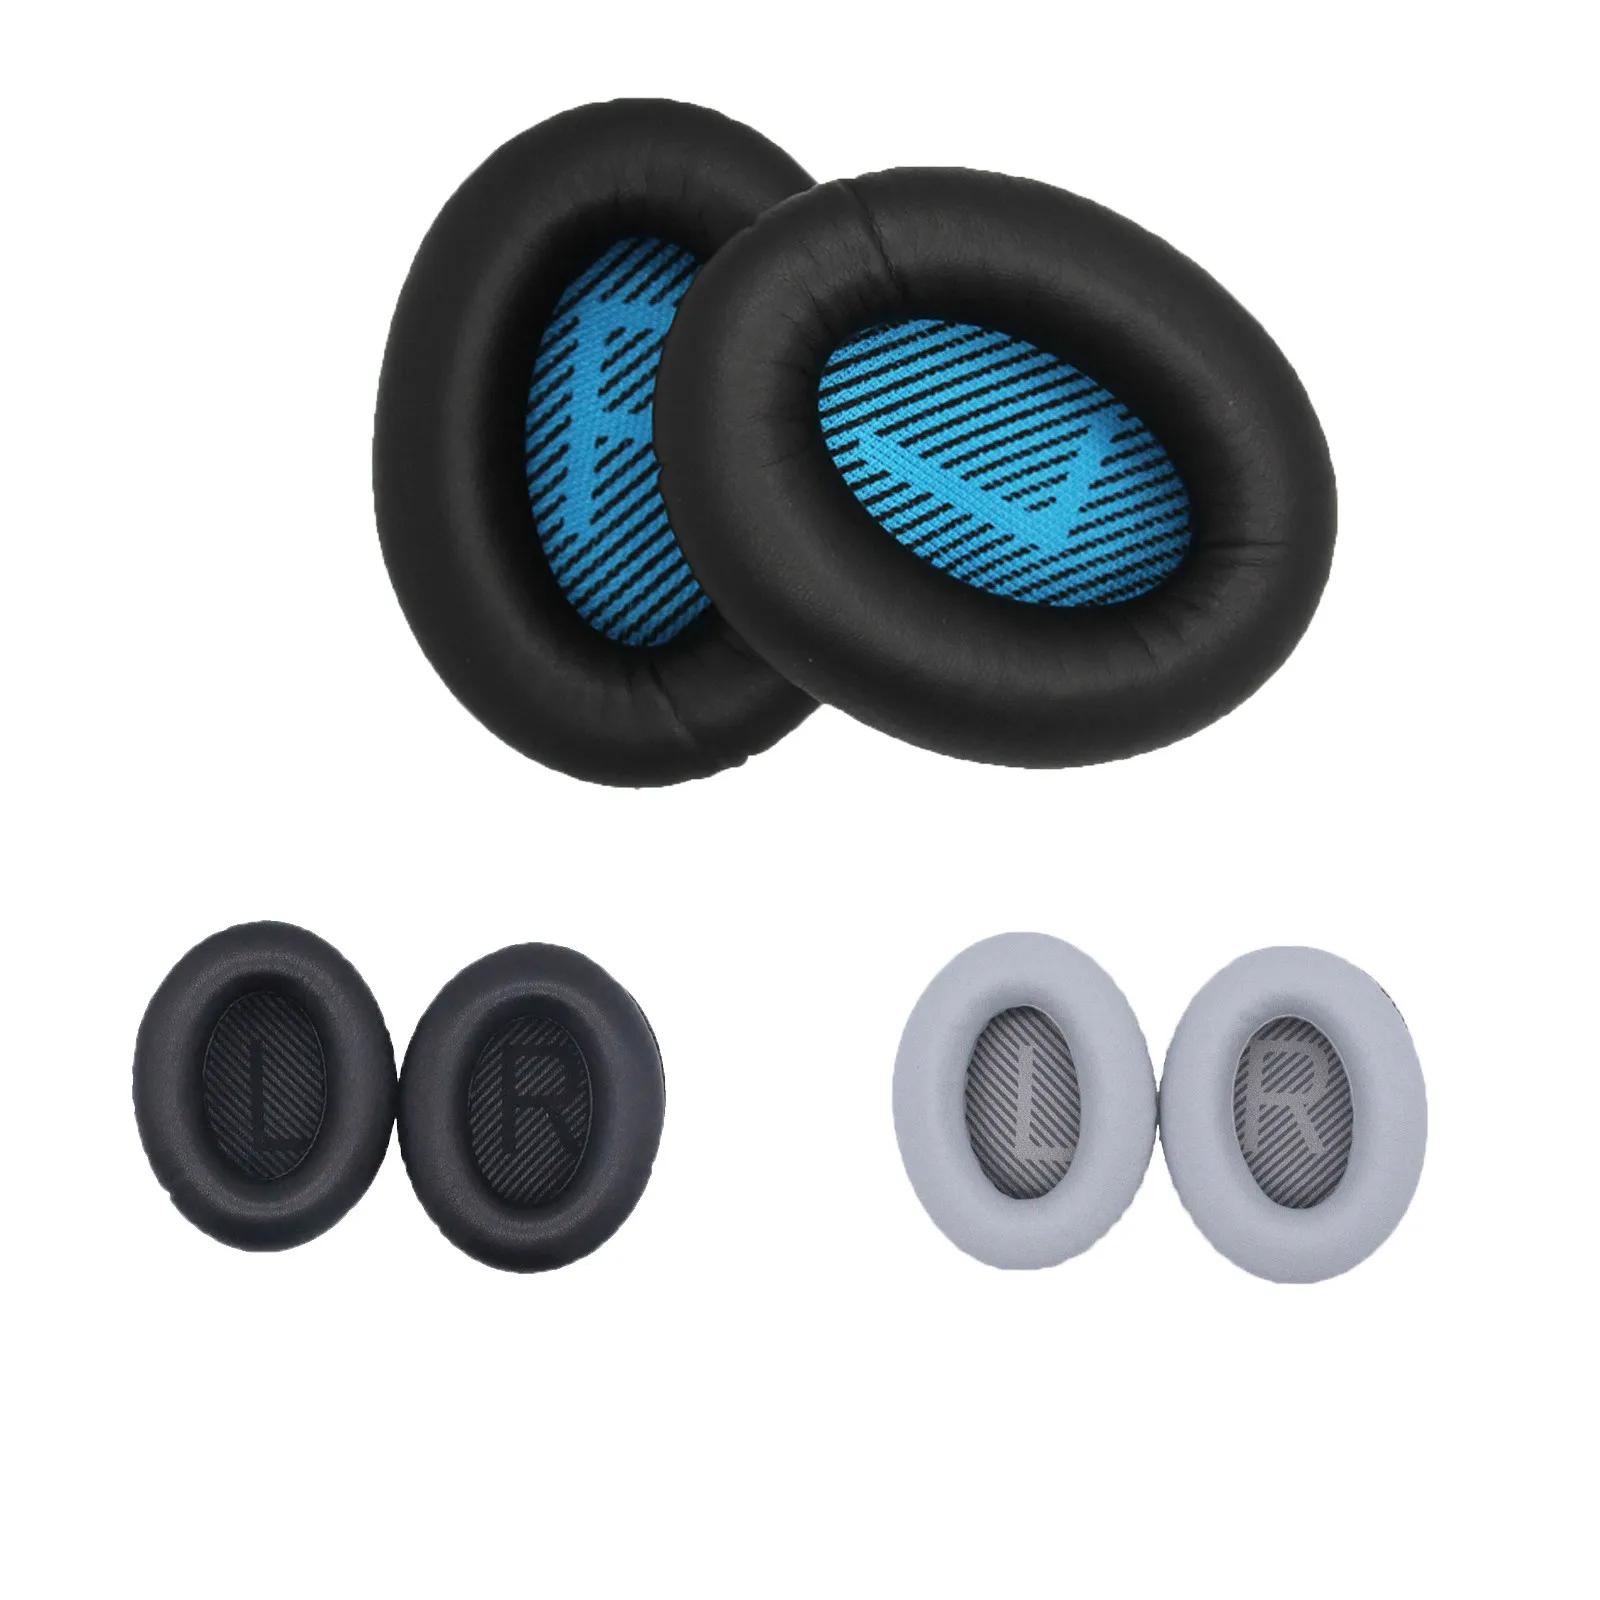 2Pcs Replacement Ear Pads For Bose QuietComfort QC2 QC15 QC25 AE2 AE2W Headphone 